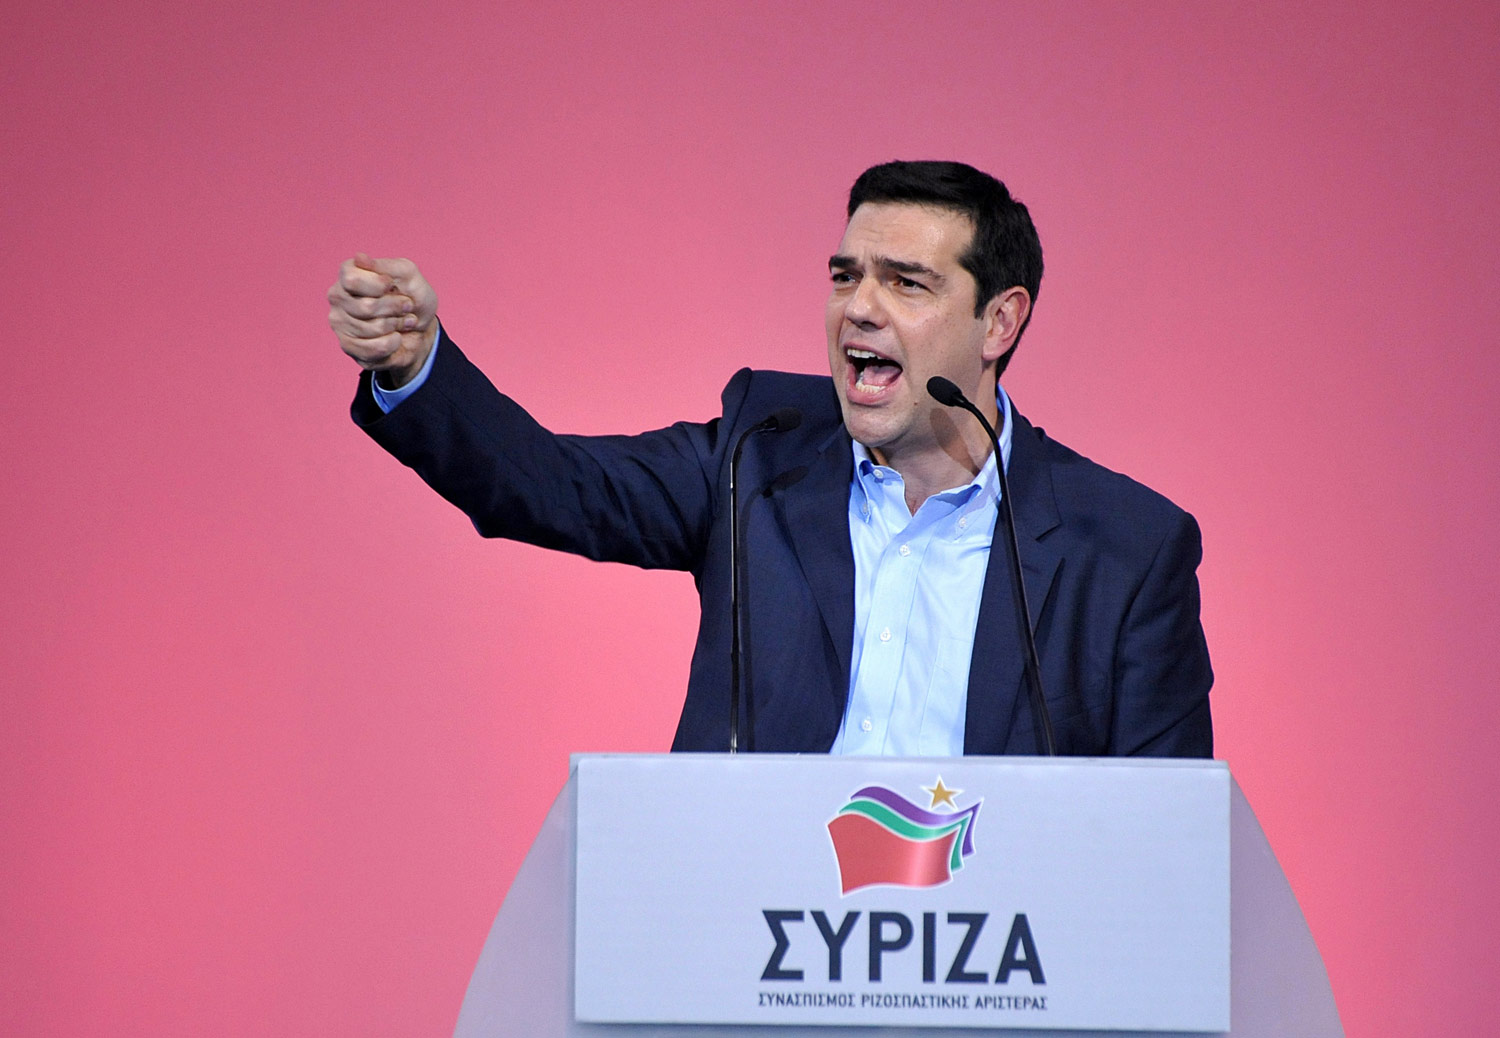 Greece May Be About to Elect Europe’s First Left-Wing Government